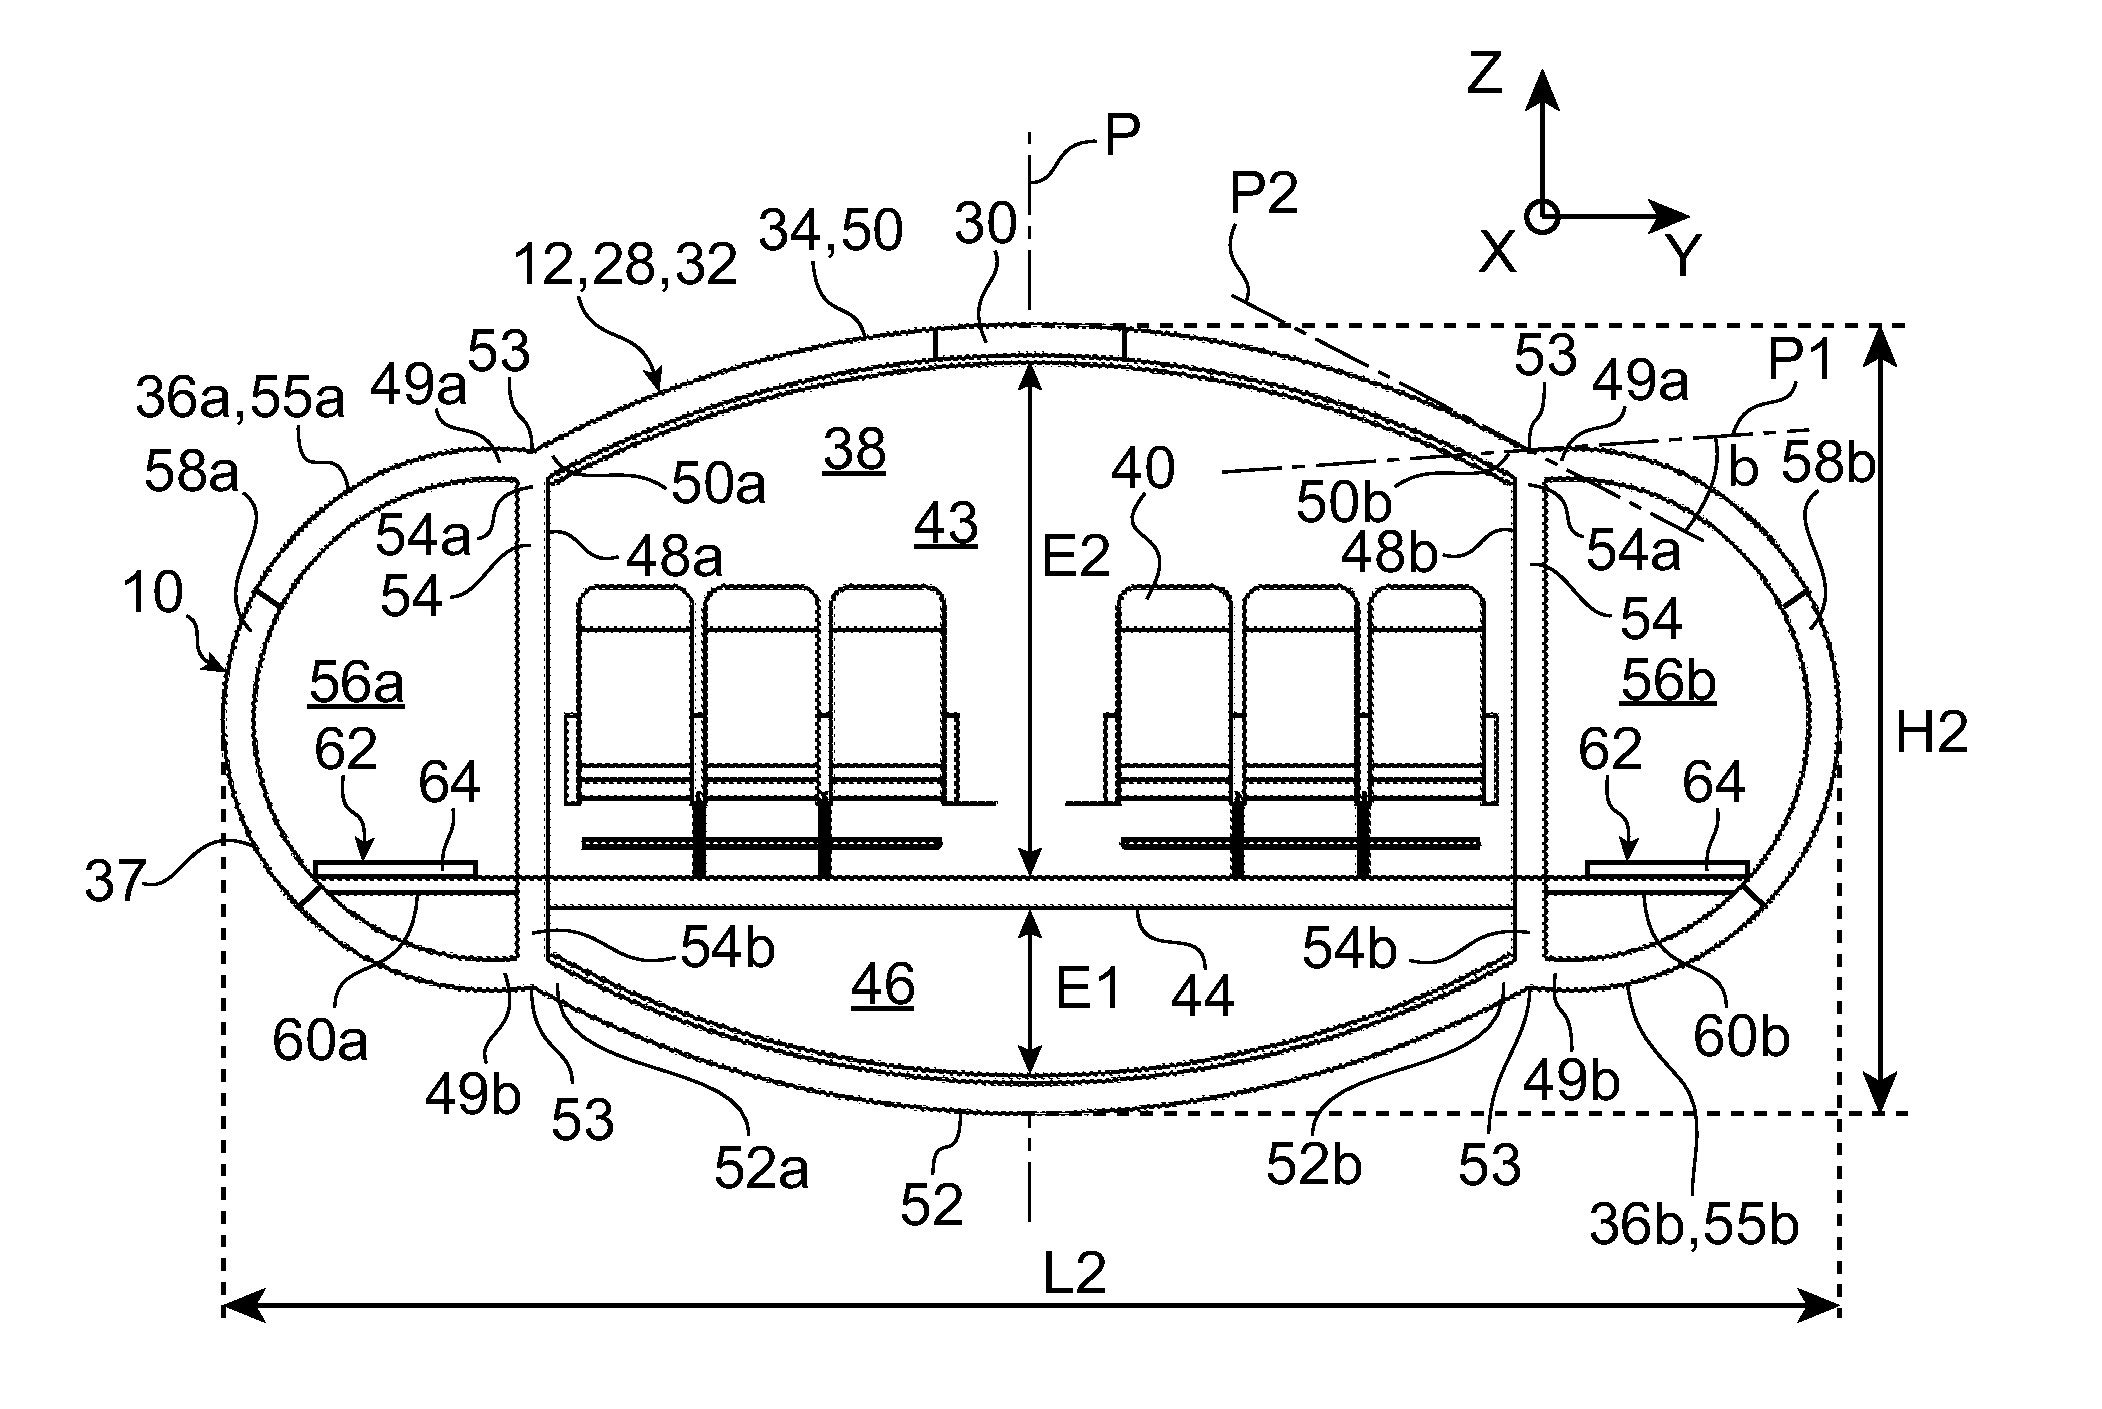 Airplane with a fuselage having side outgrowth delimiting storage spaces